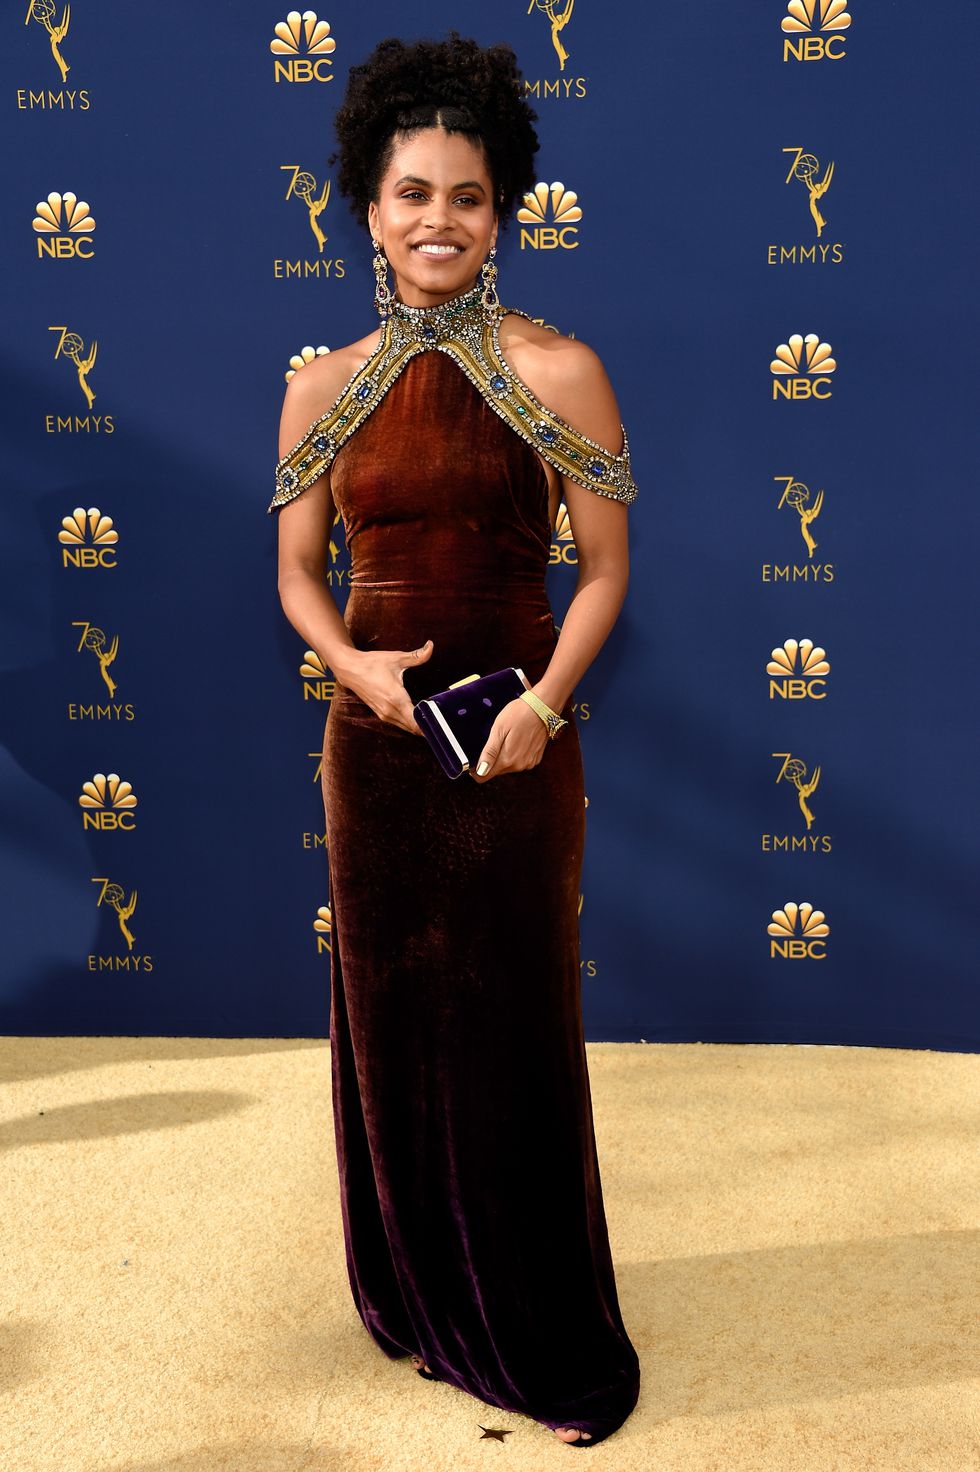 Millie Bobby Brown Is an Adorable Cupcake in Emmys Gown - Millie Bobby  Brown Red Carpet Emmys Look